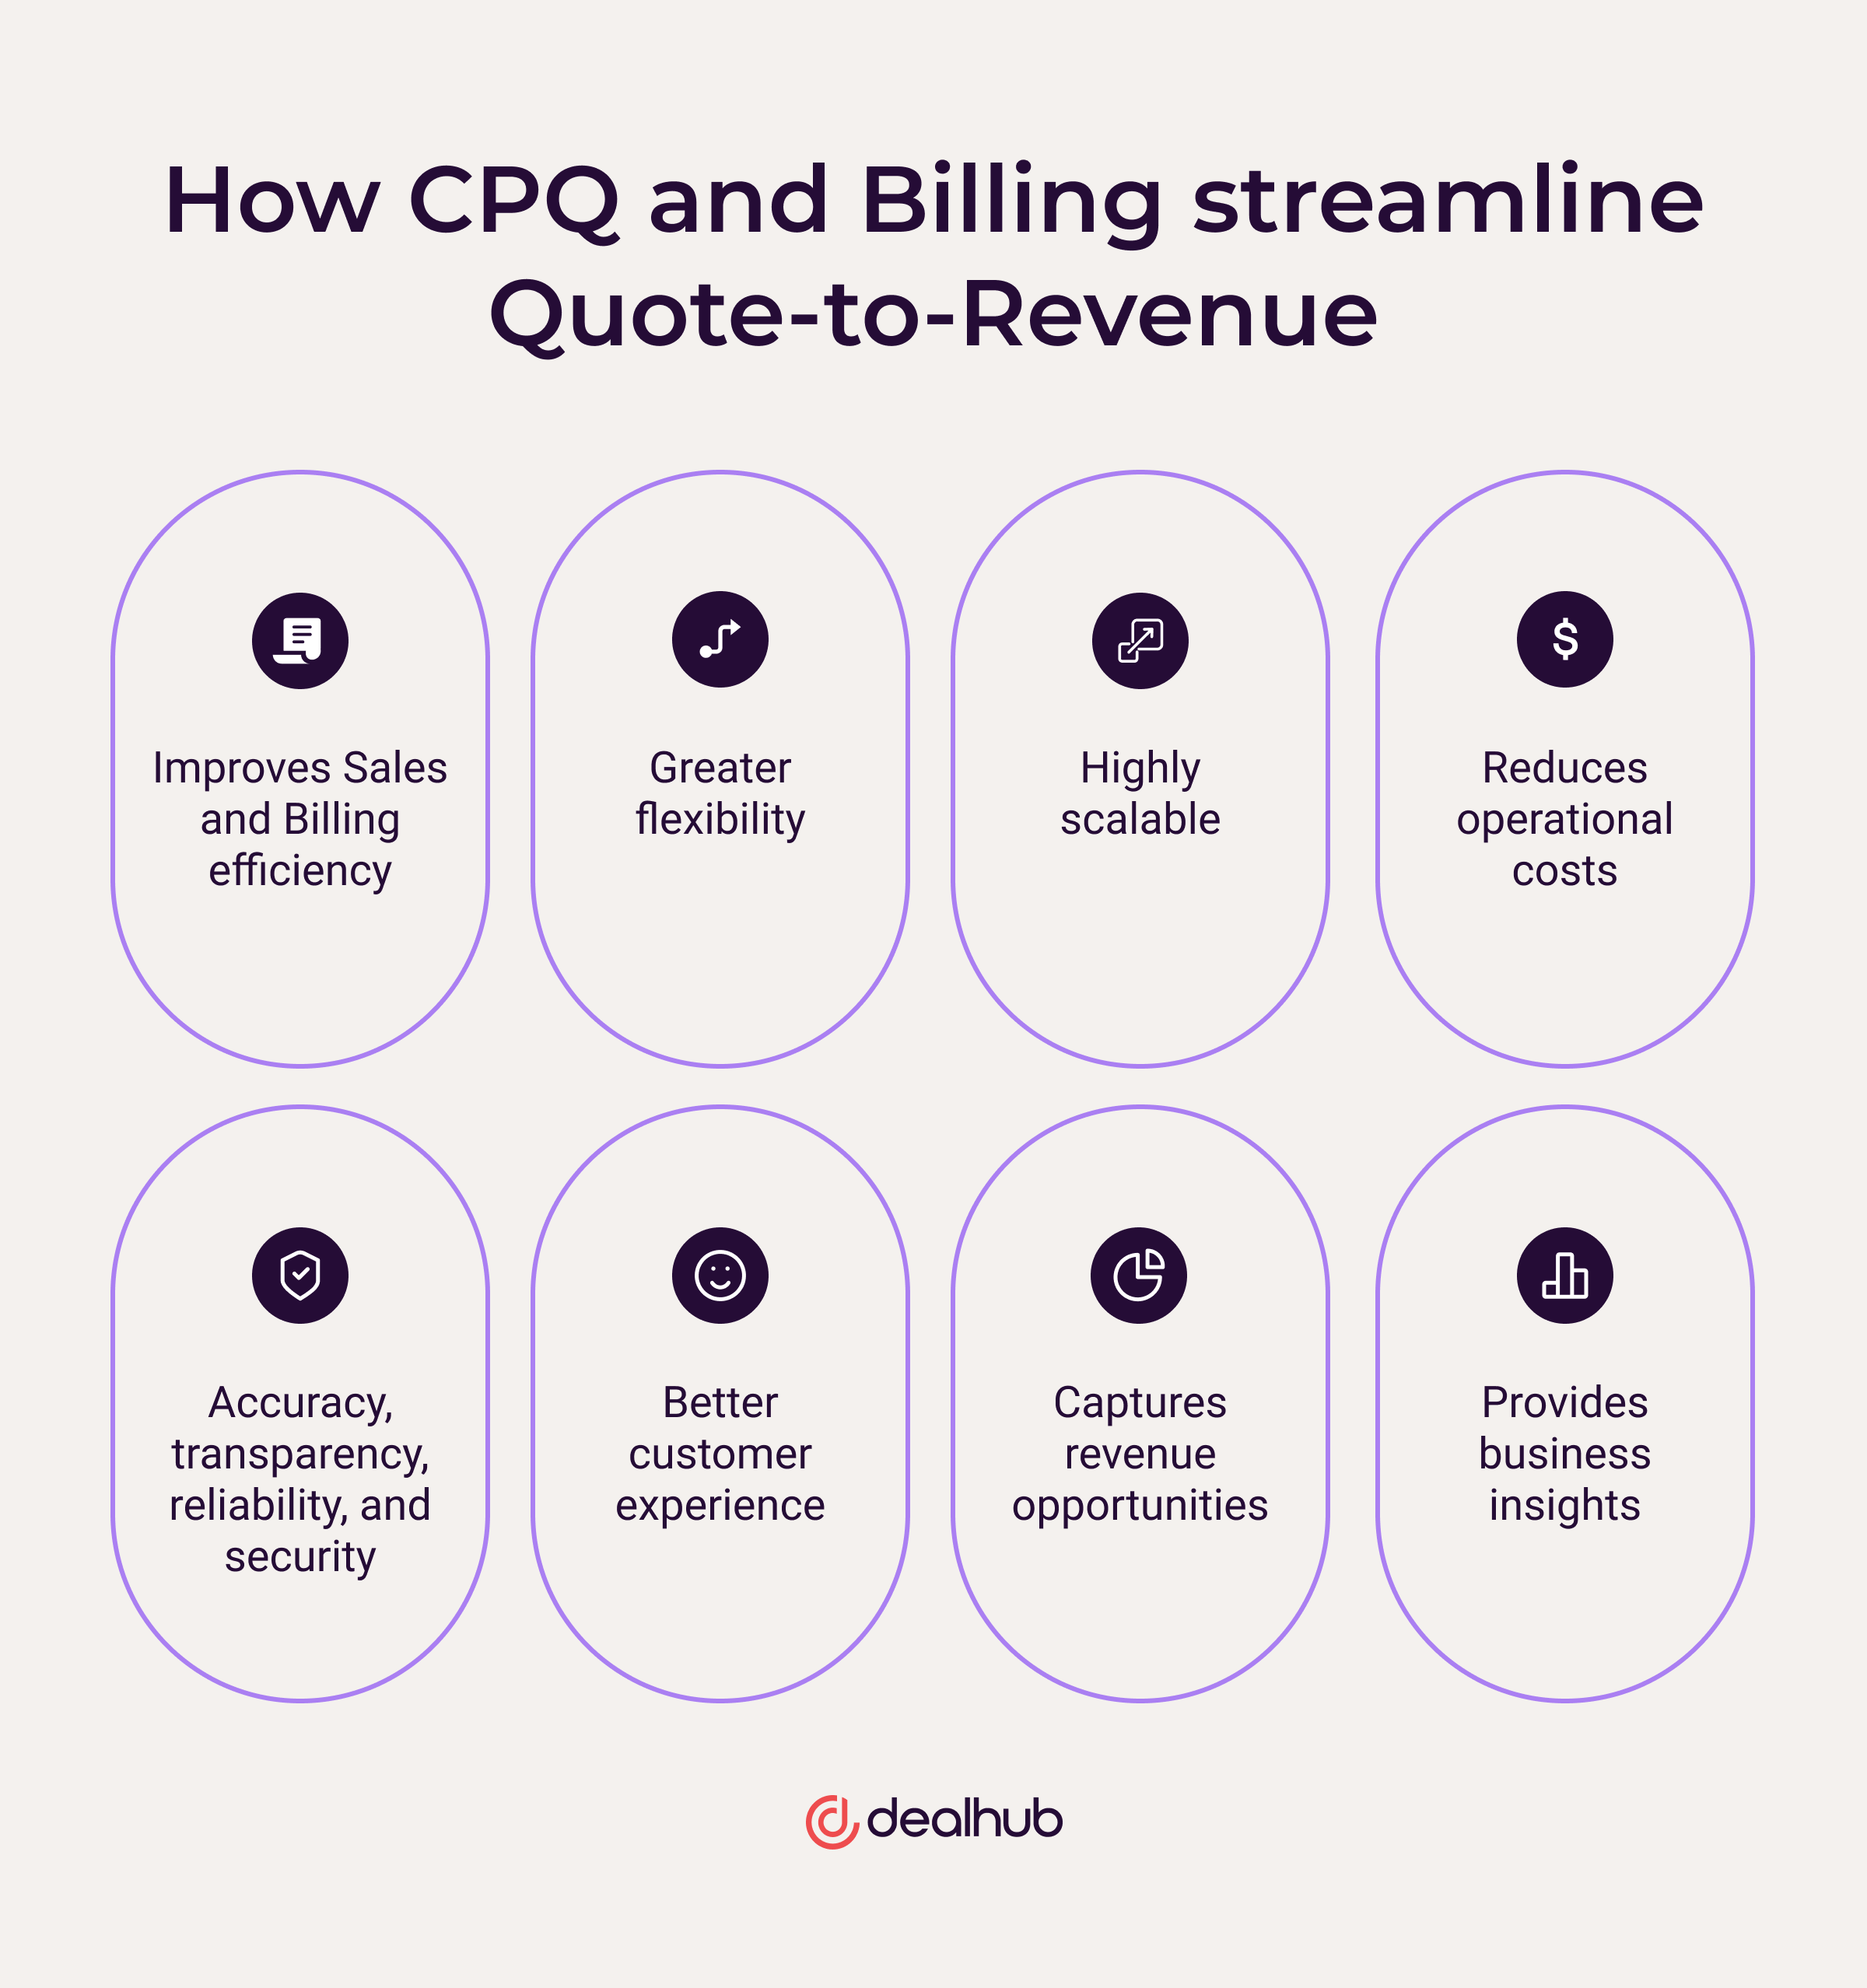 How CPQ and Billing streamline Quote-to